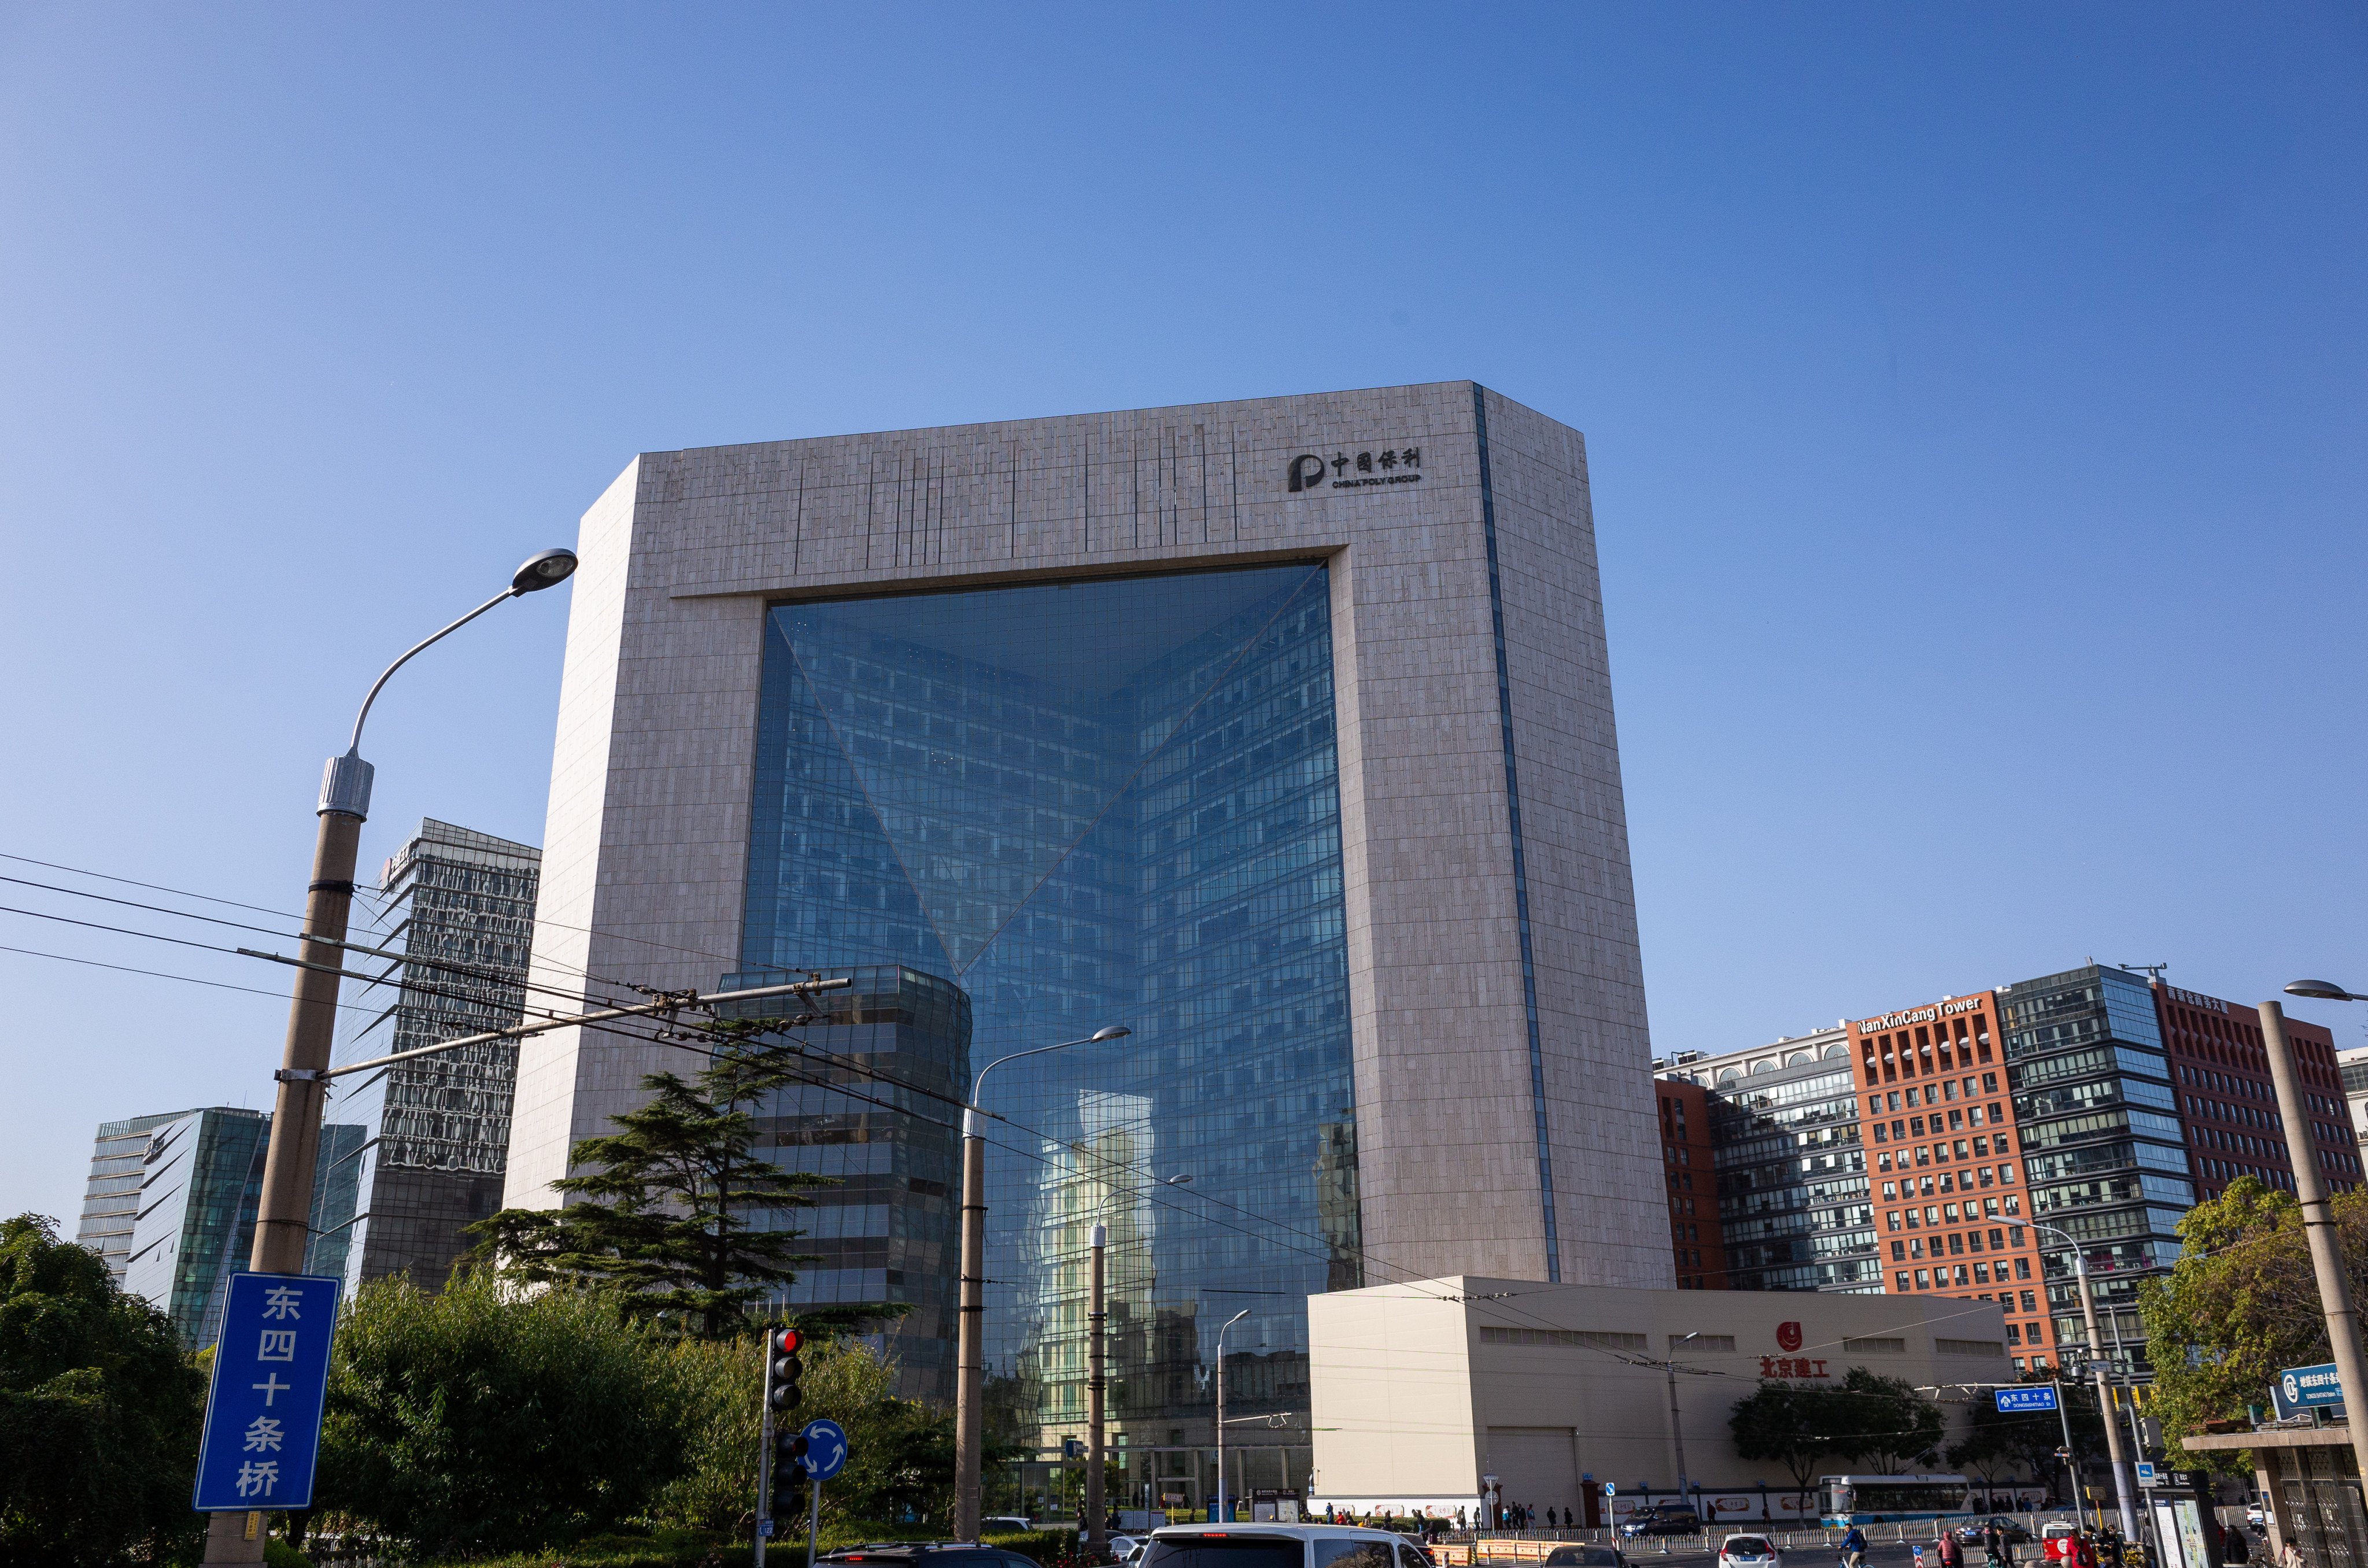 New Beijing Poly Plaza, the location of the headquarters of China Investment Corporation in Beijing. Photo: Shutterstock